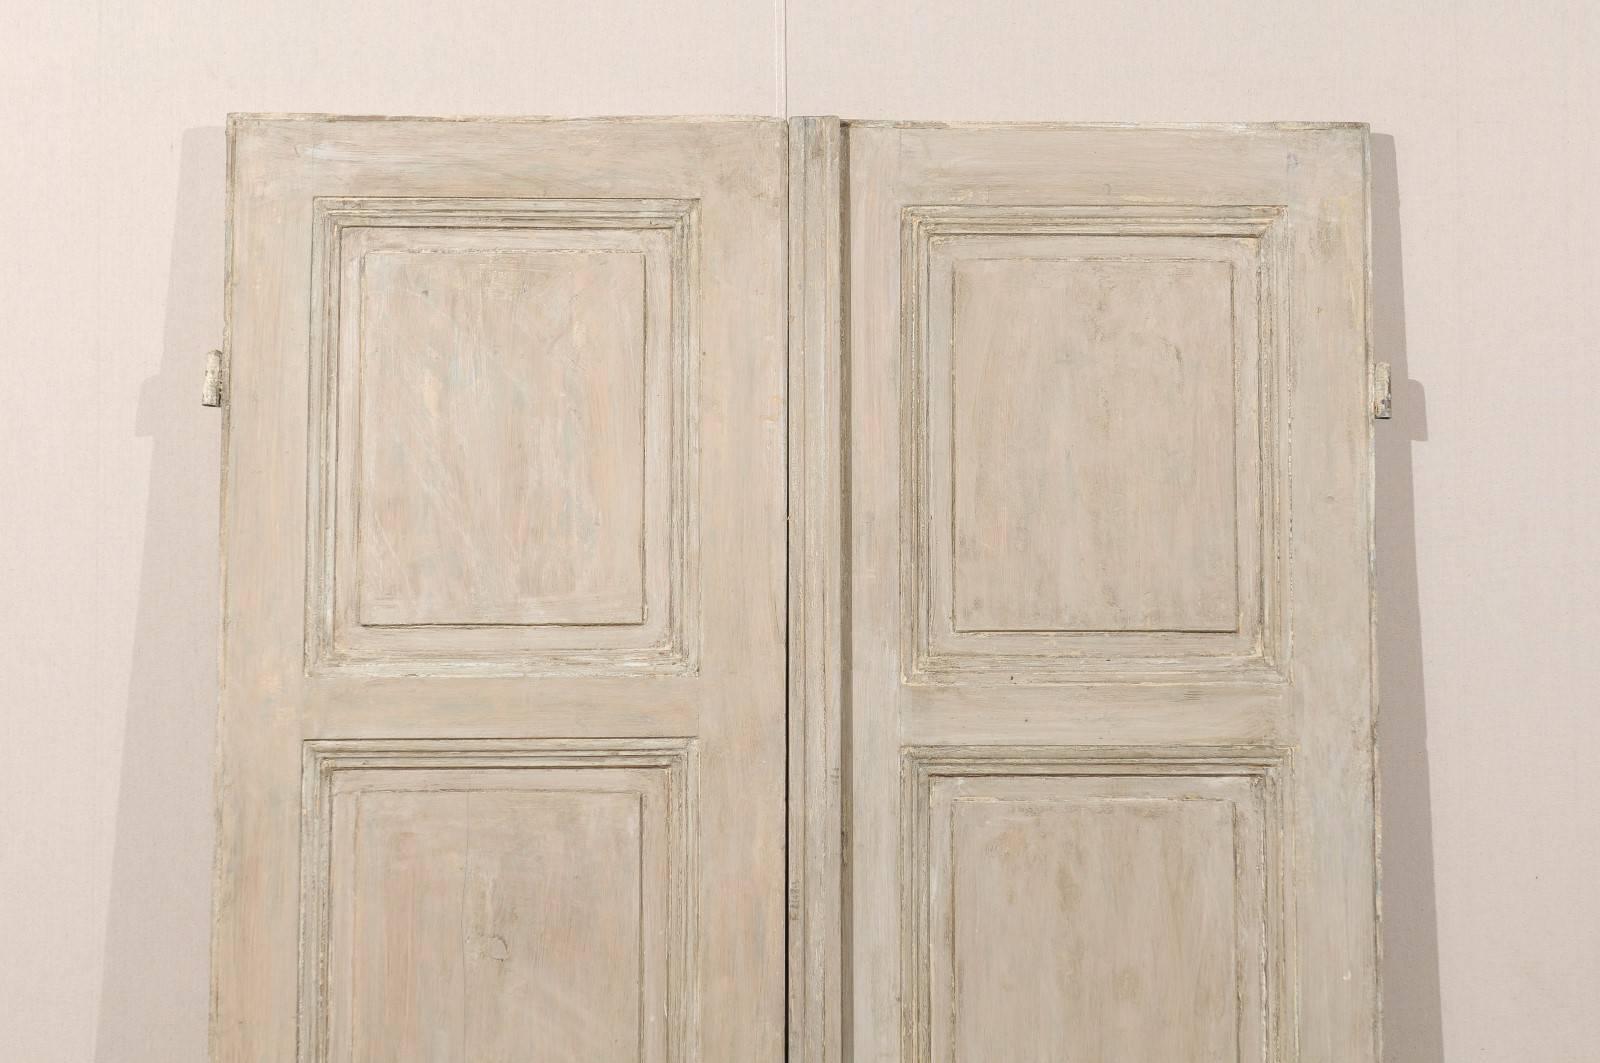 Wood Pair of French Grey Painted Doors, Grey Color with Some Taupe Colored Accents